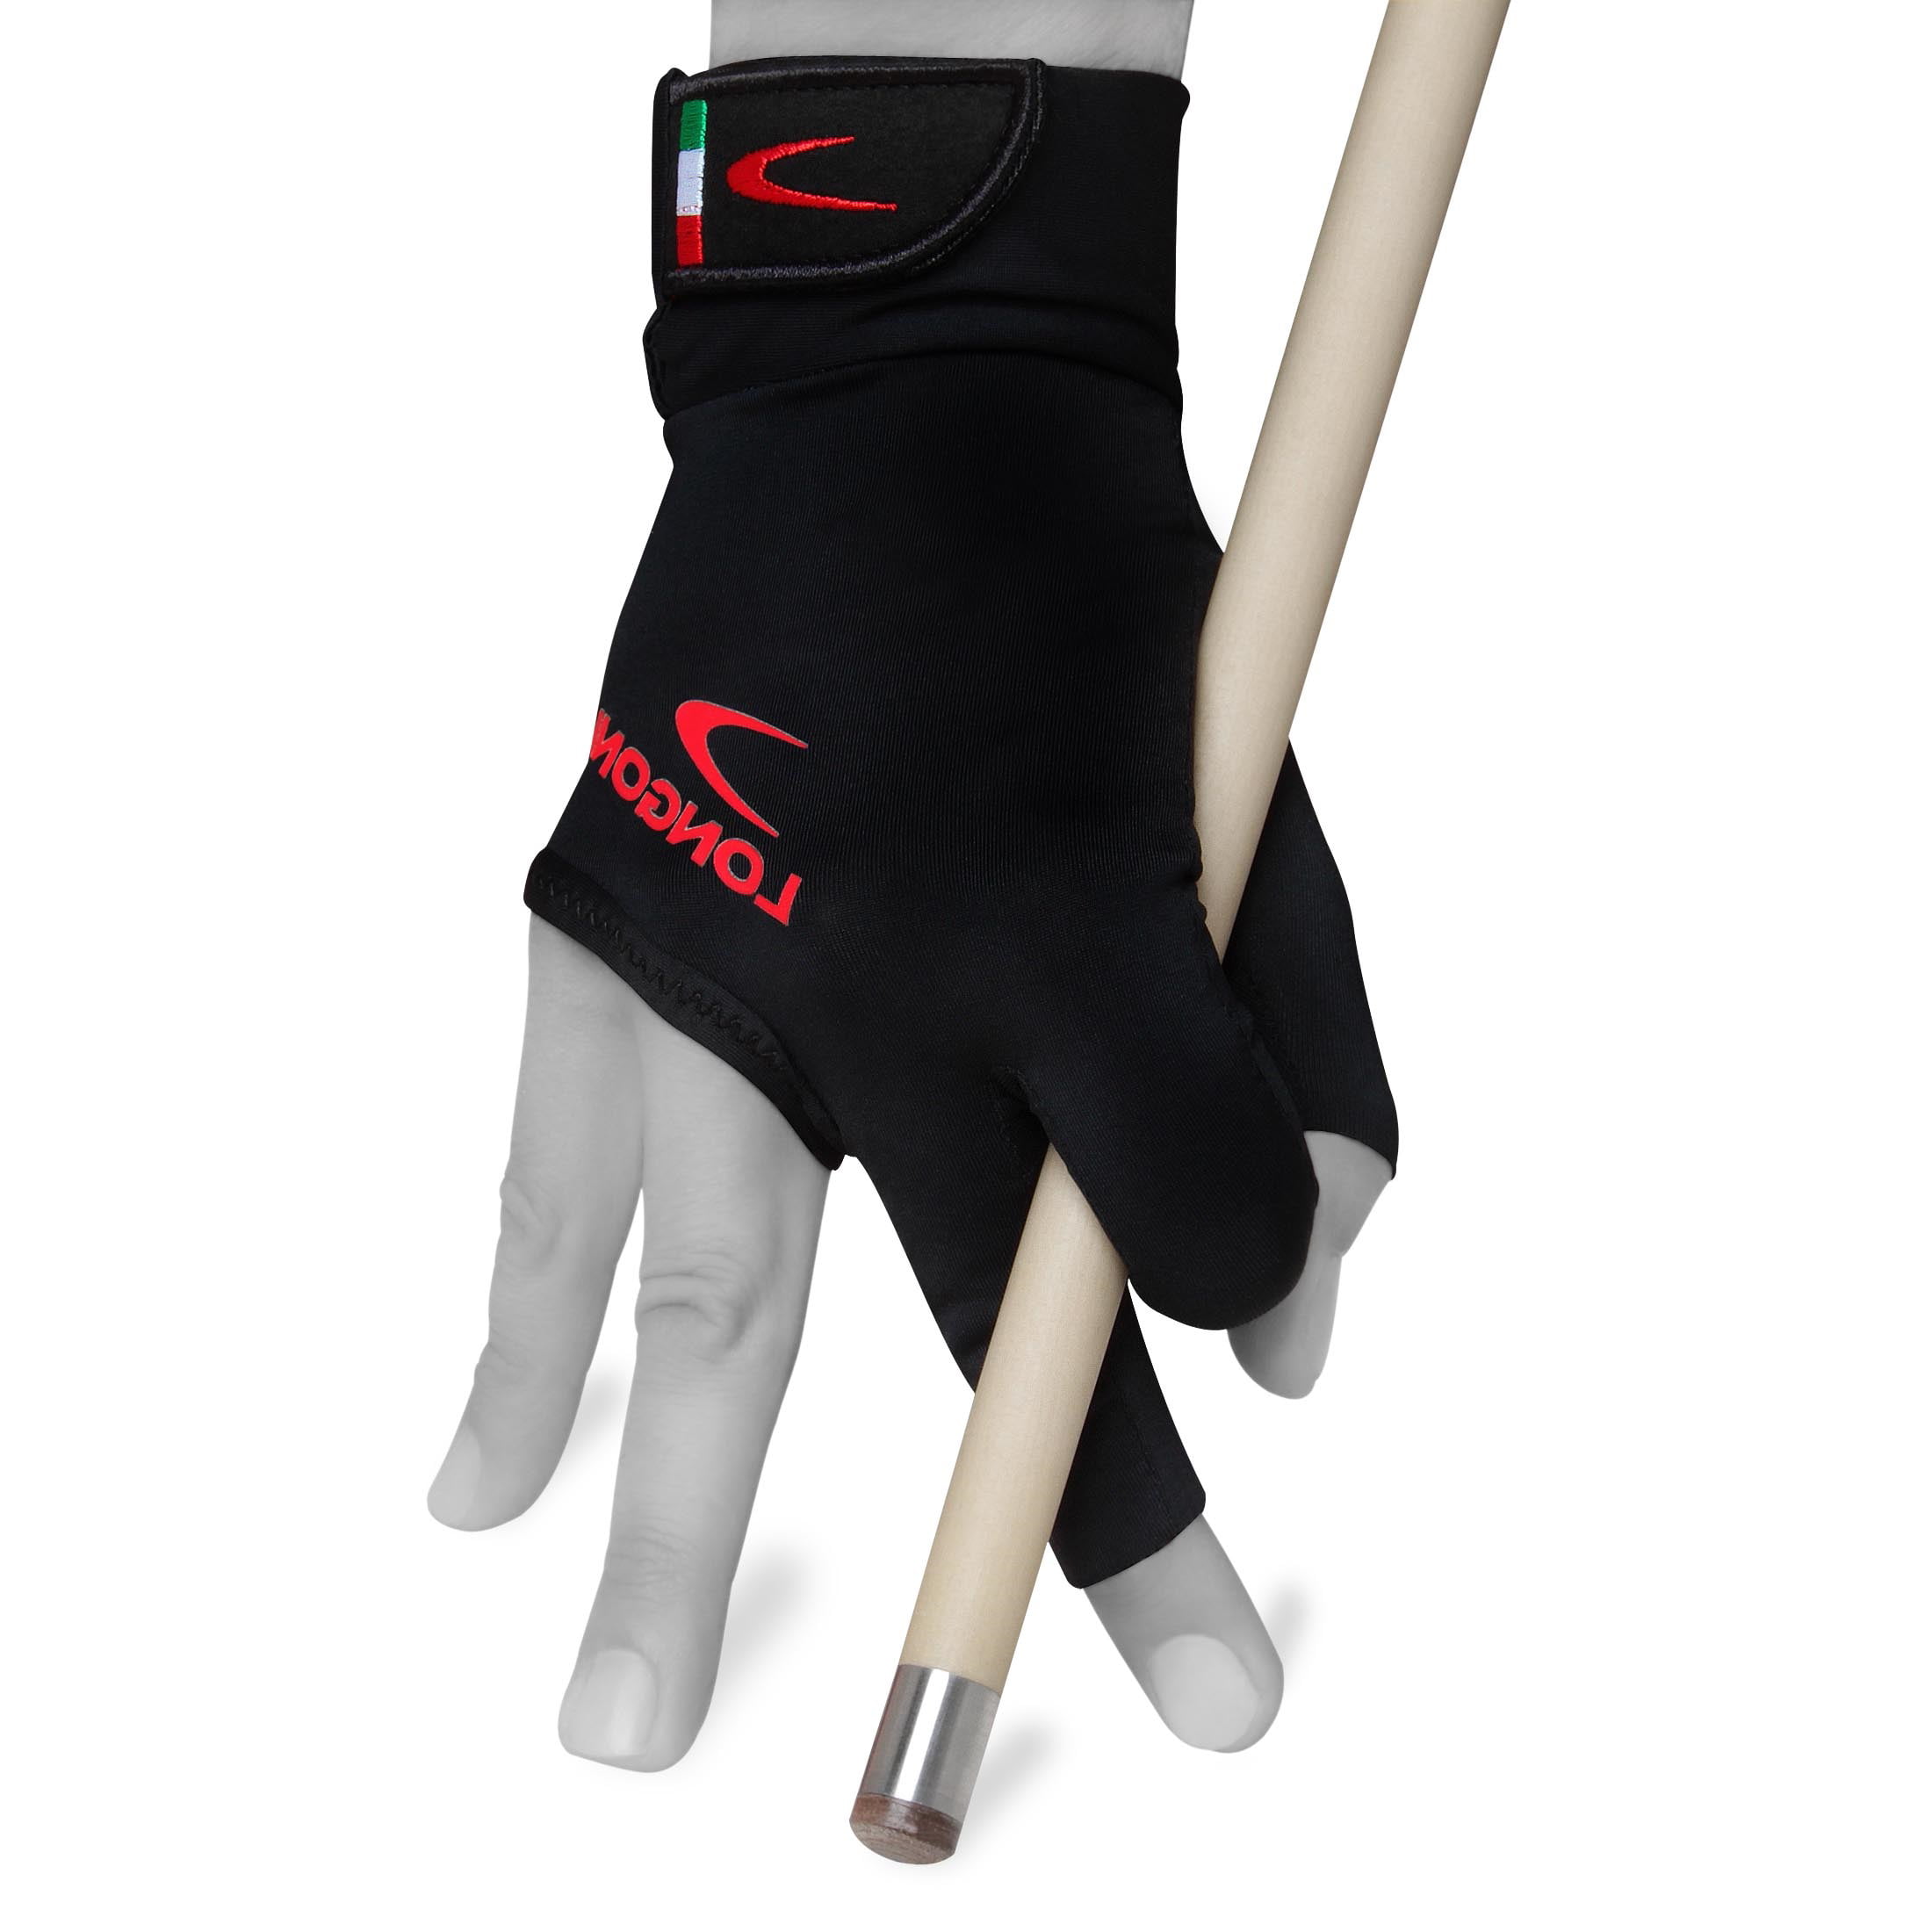 Longoni Black Fire 2.0 Billiard Pool CUE Glove Black for Left or Right Hand 